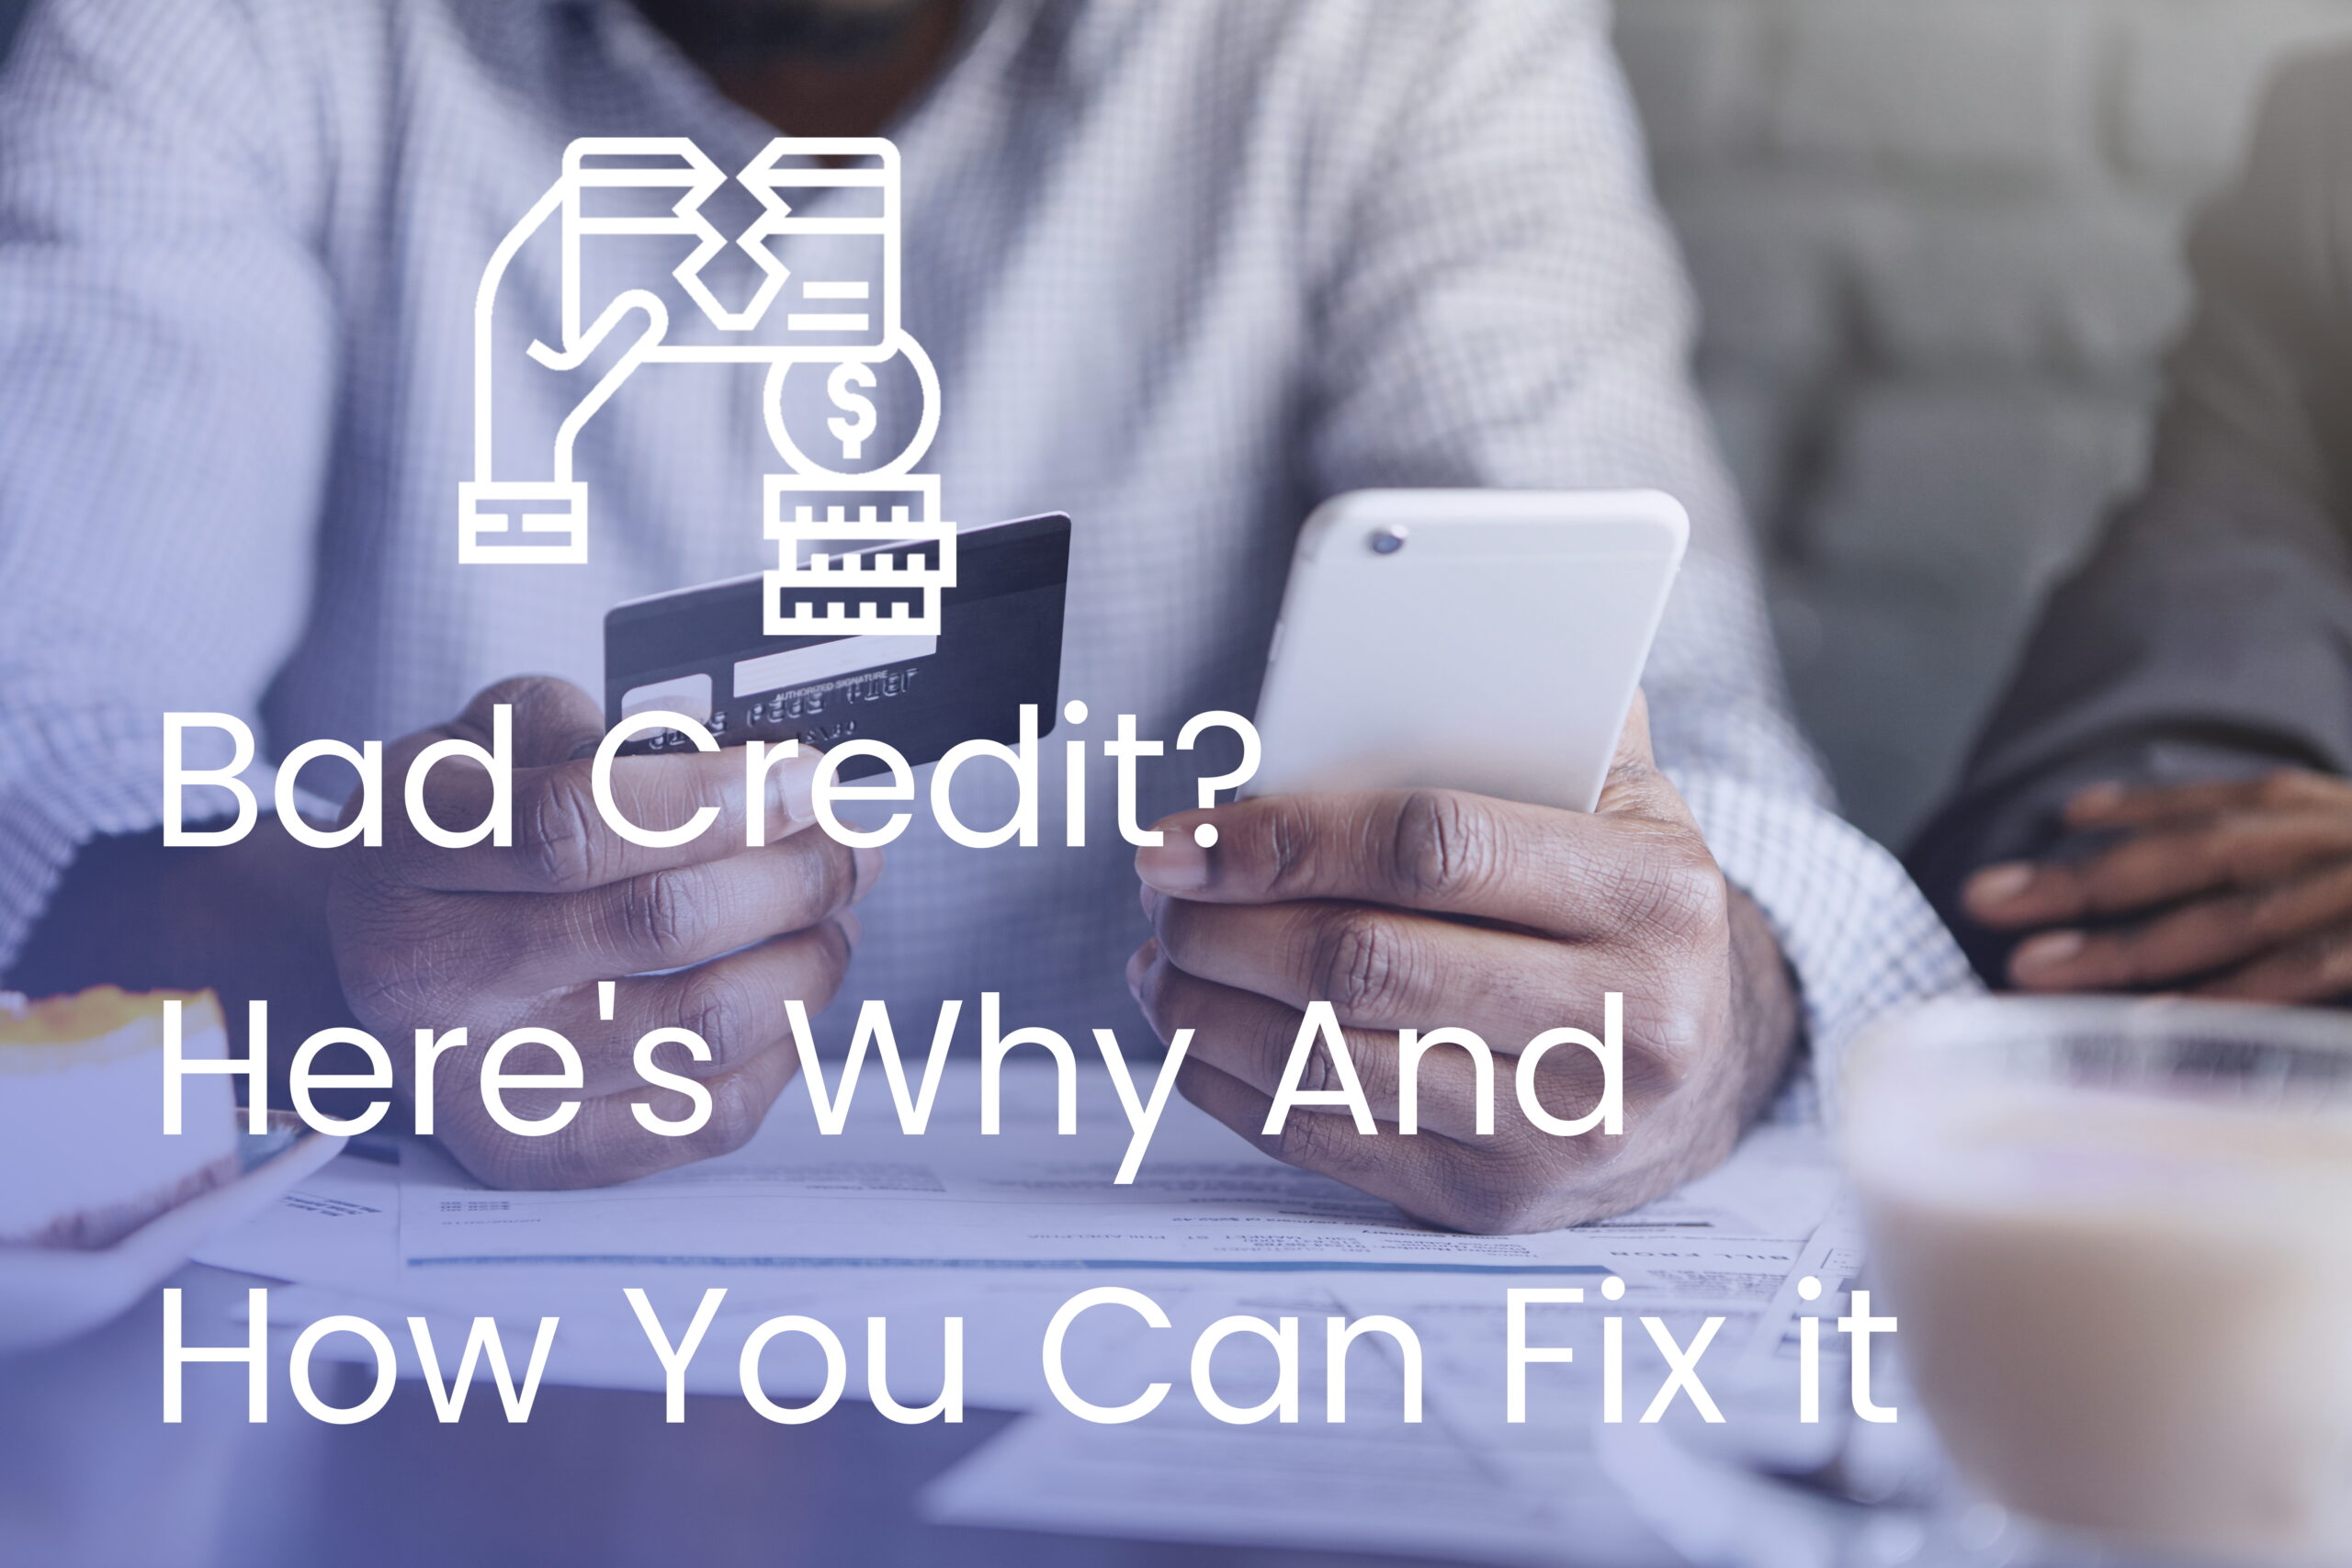 Bad Credit Car Loans Victoria, BC - Here's Why And How You Can Fix It